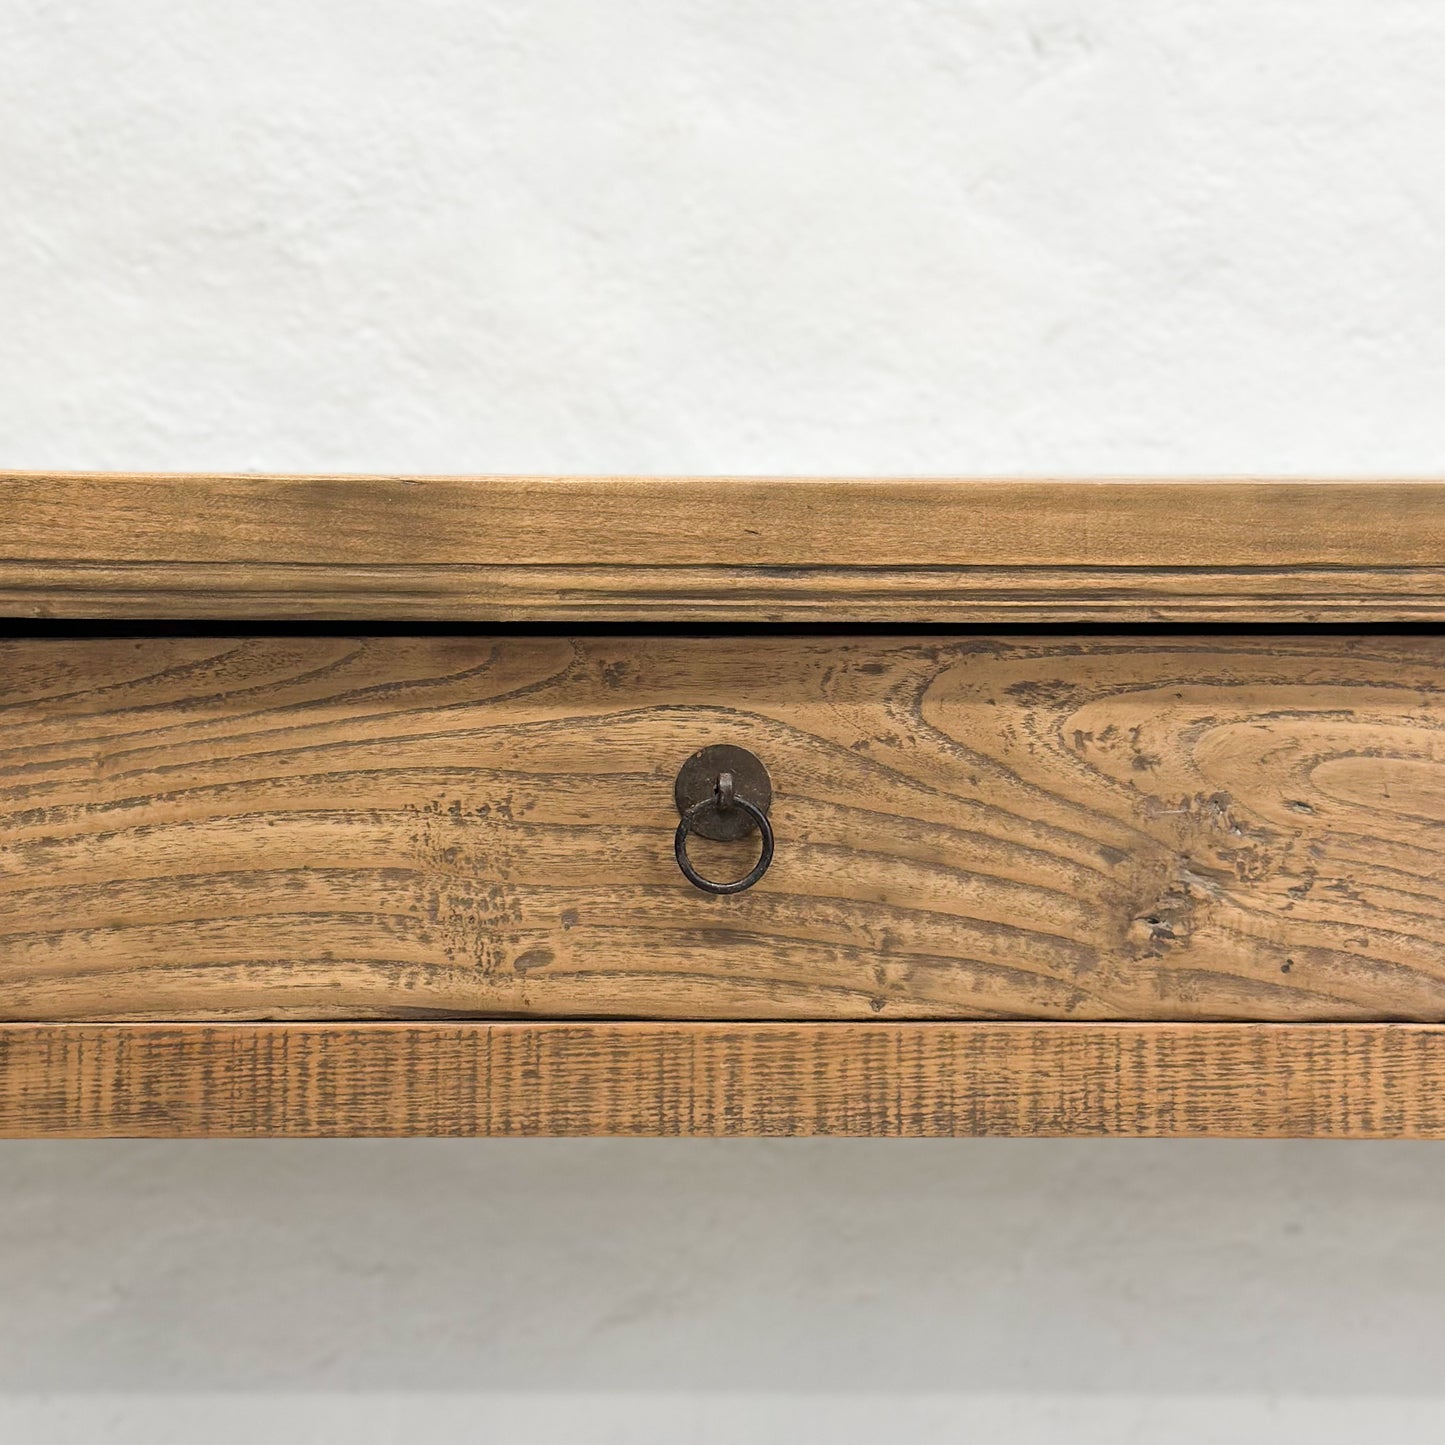 Rustic 3 Drawer Elm Console Table